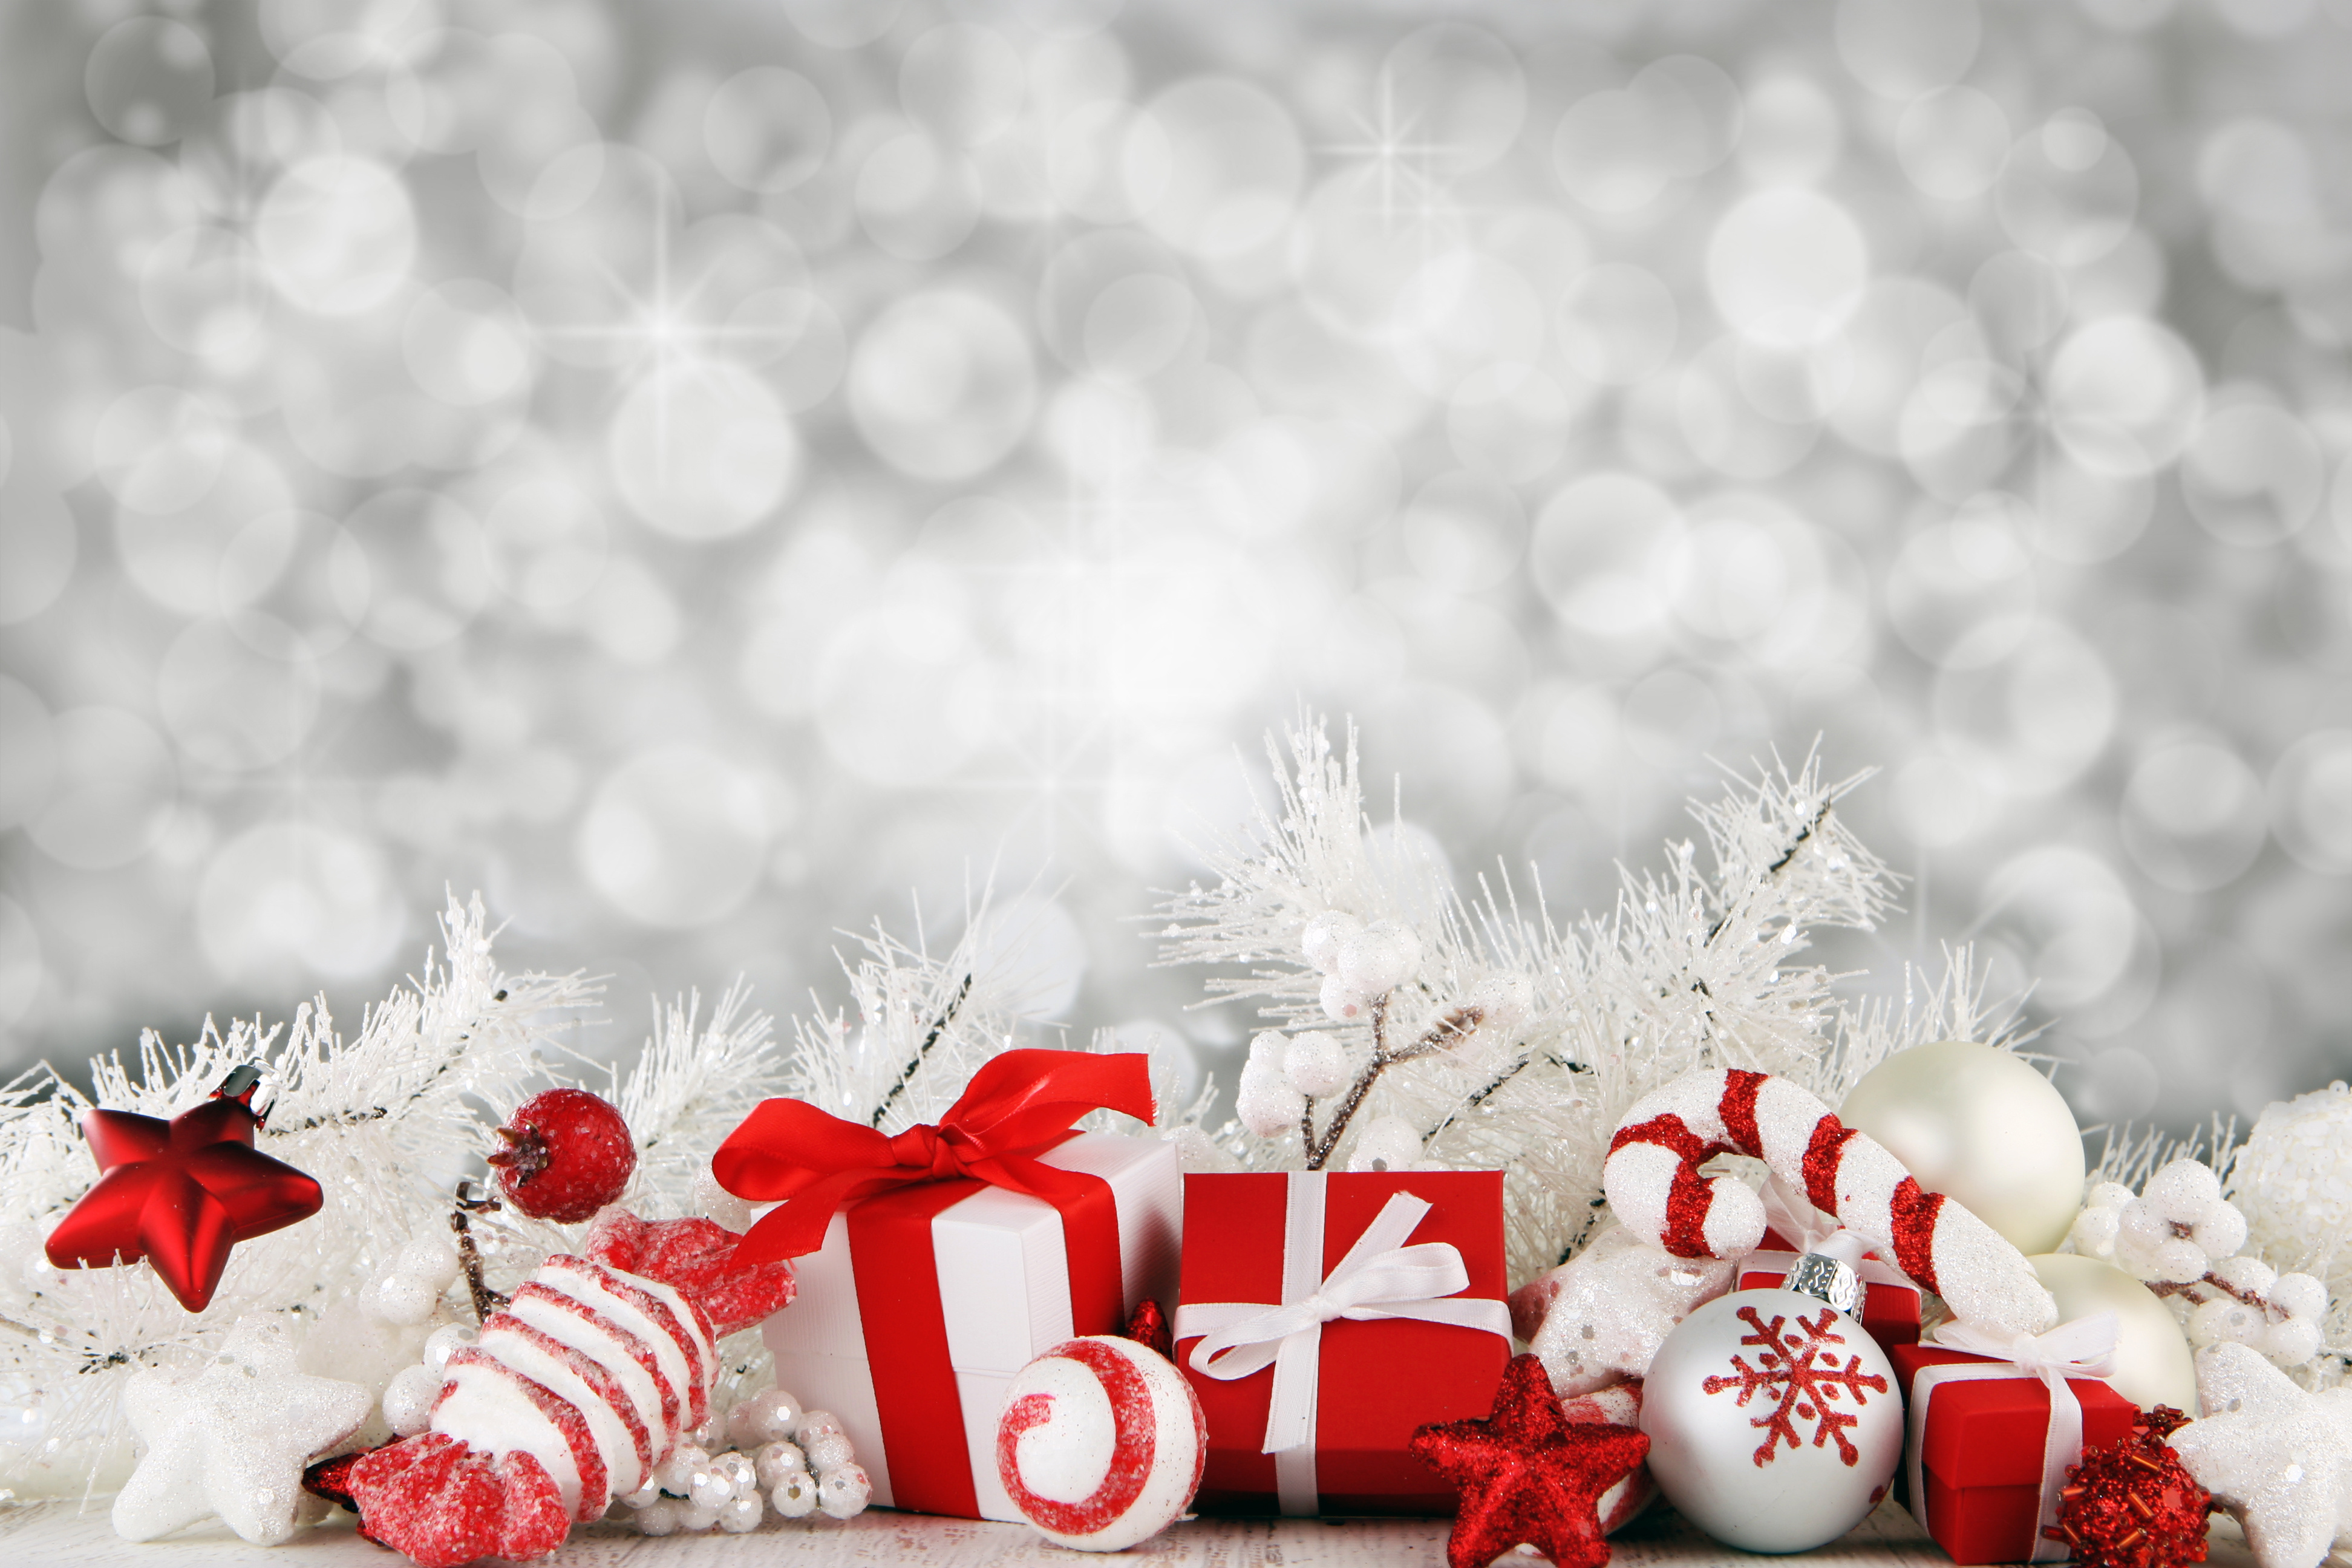 2015 Christmas Backgrounds   Wallpapers Pics Pictures 3888x2592